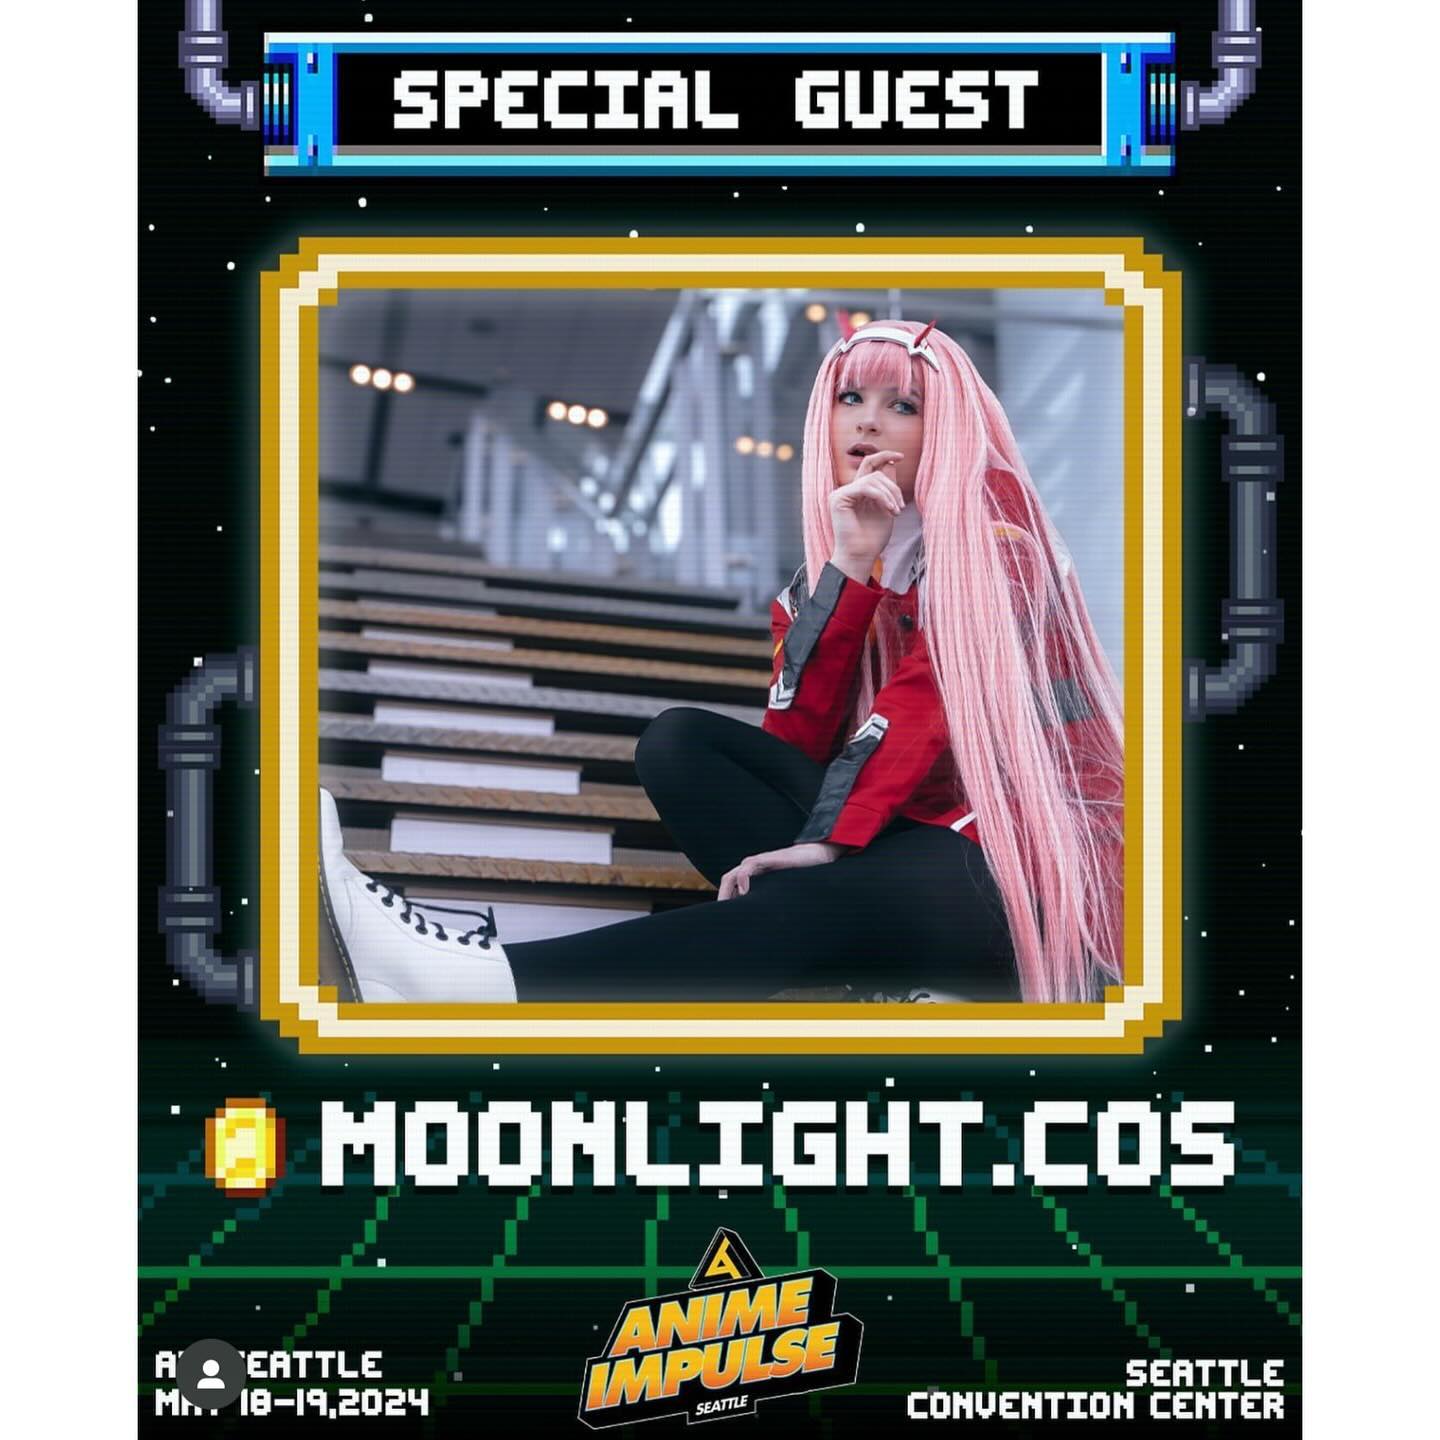 { swipe to see some of the other amazing cosplay guests that’ll be at @animeimpulse in a few weeks! So excited to see everyone! 🥺✨💖 }

{ 📆: May 18th-19th }
{ 📍: Seattle convention center }
{ 🎟️: http://animeimpulse.com/tickets }

{ #animeimpulse #cosplayguest #pnw #seattle #seattlewashington #cosplayer #convention #animeconvention }